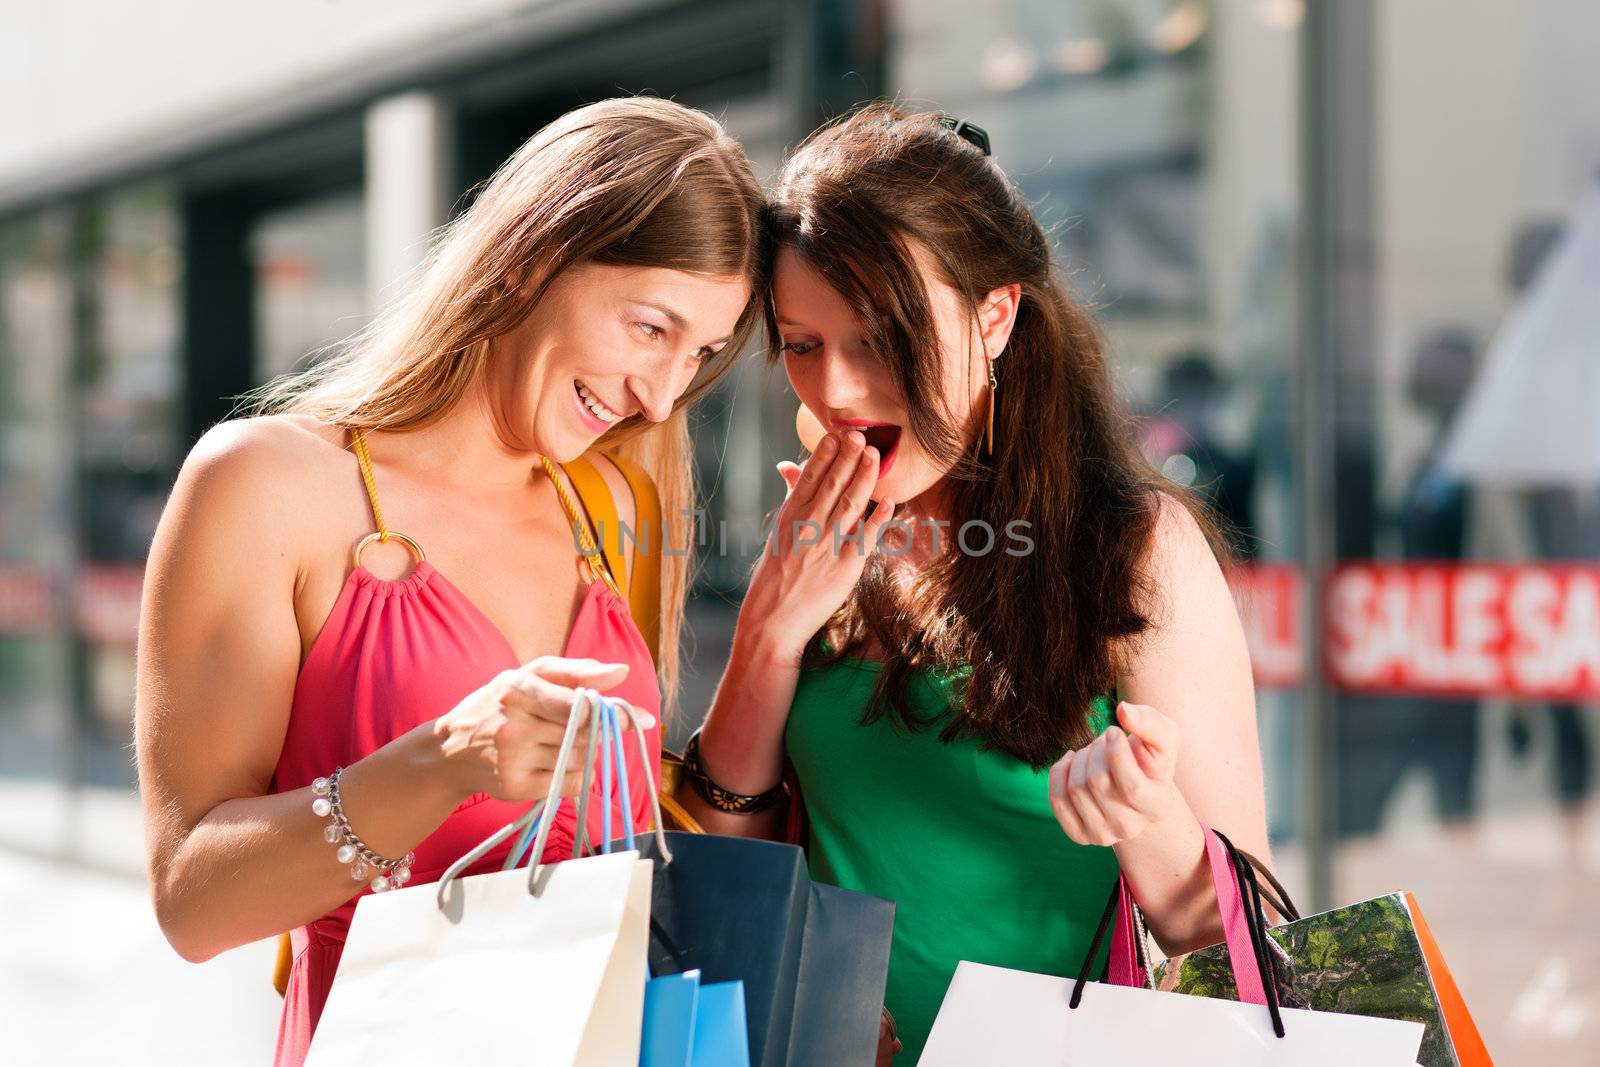 Two women being friends shopping downtown with colorful shopping bags, in the background a store can be seen with the words "sale" in the window